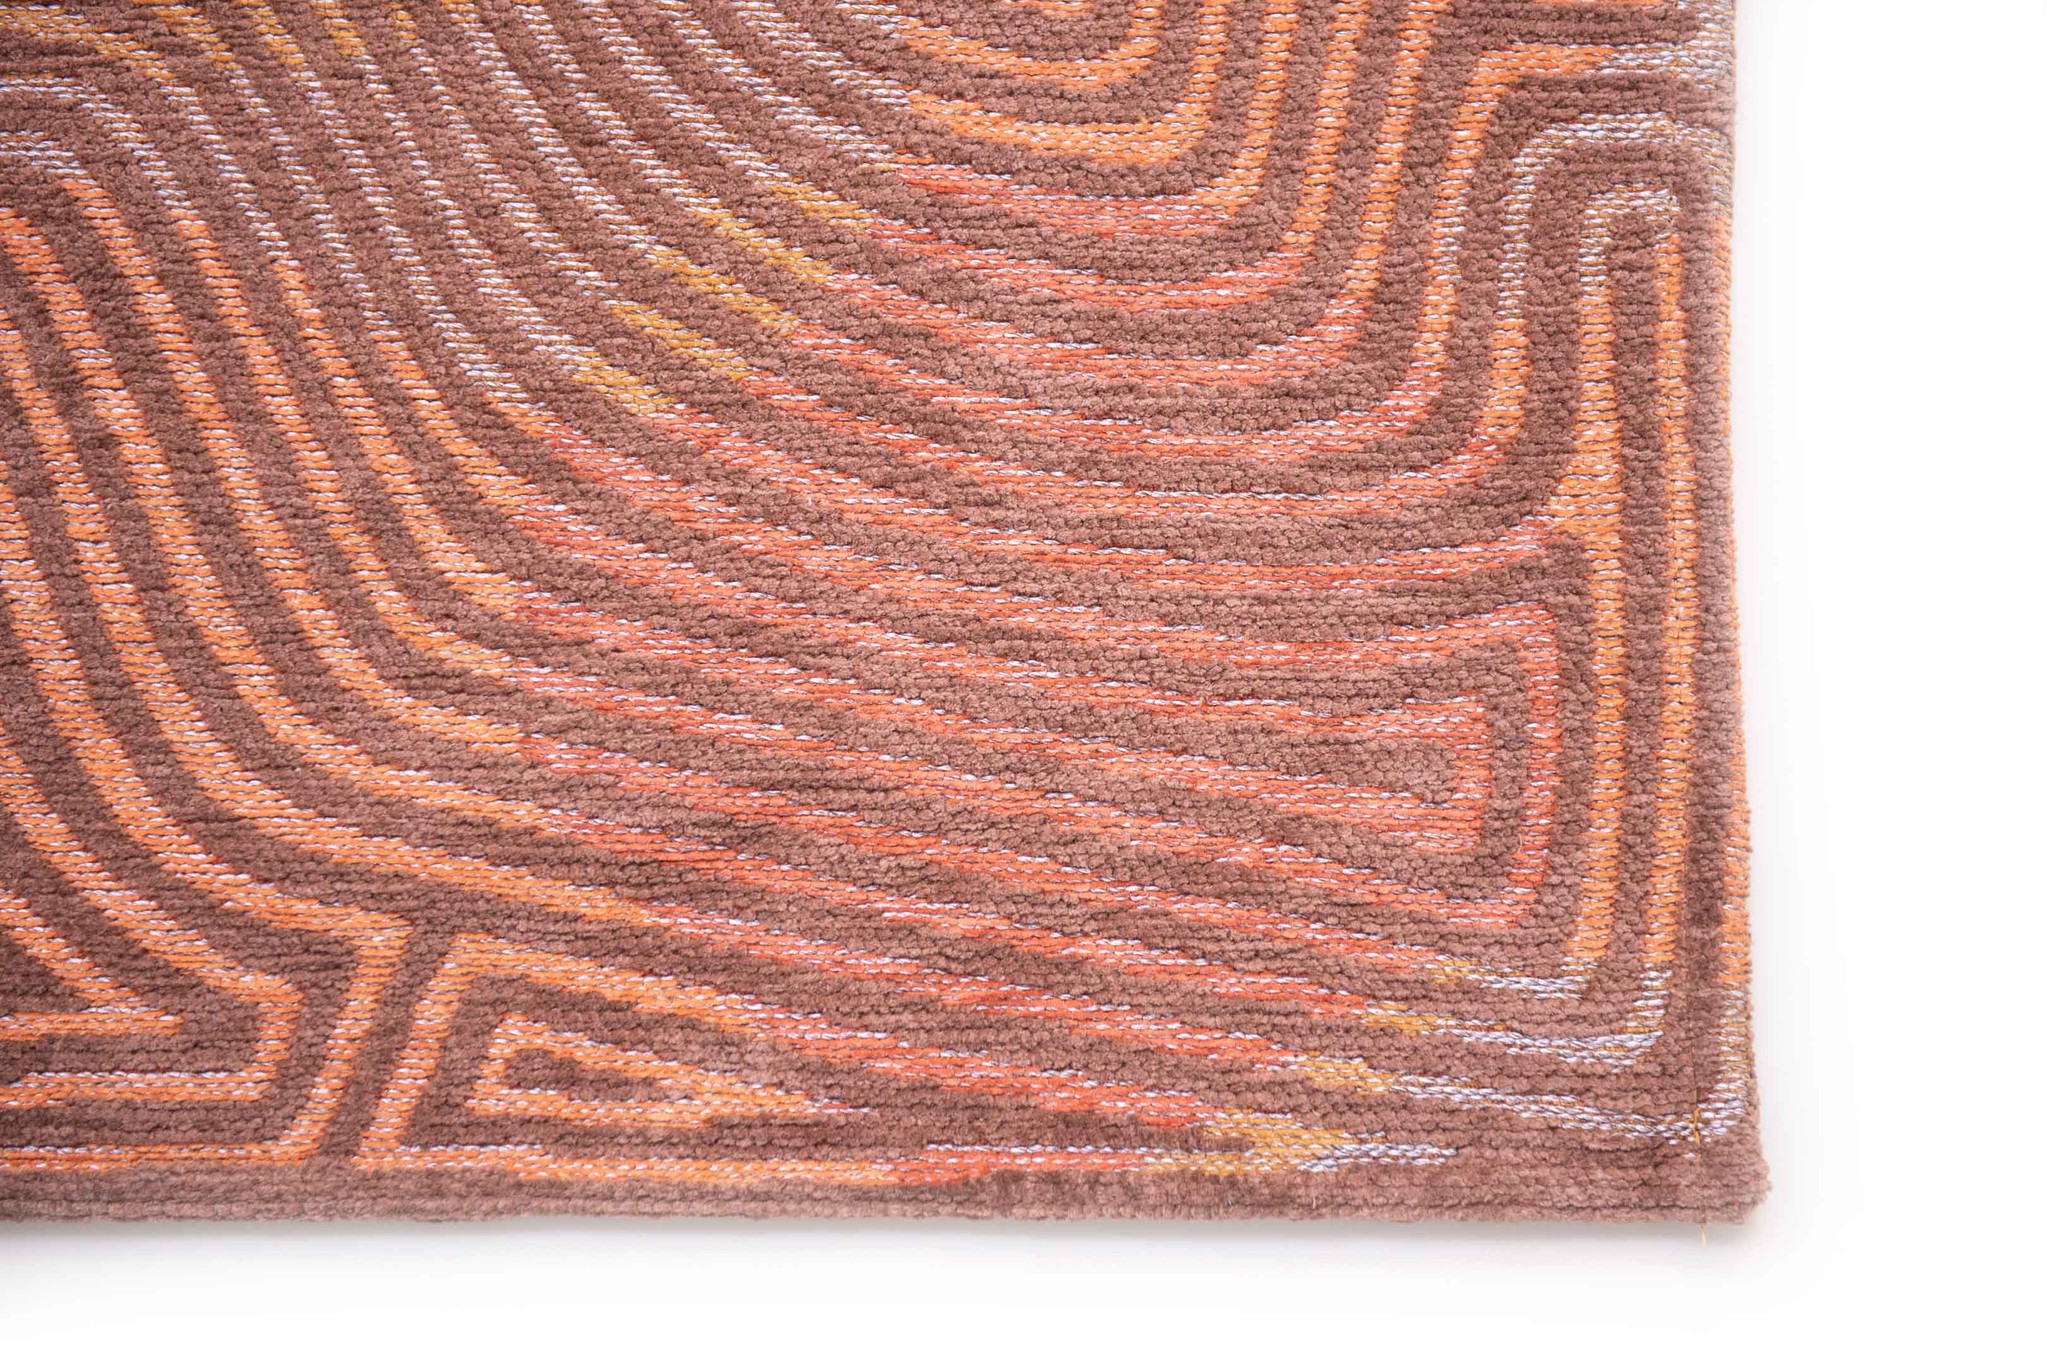 Brown Waves Flatwoven Rug ☞ Size: 6' 7" x 9' 2" (200 x 280 cm)